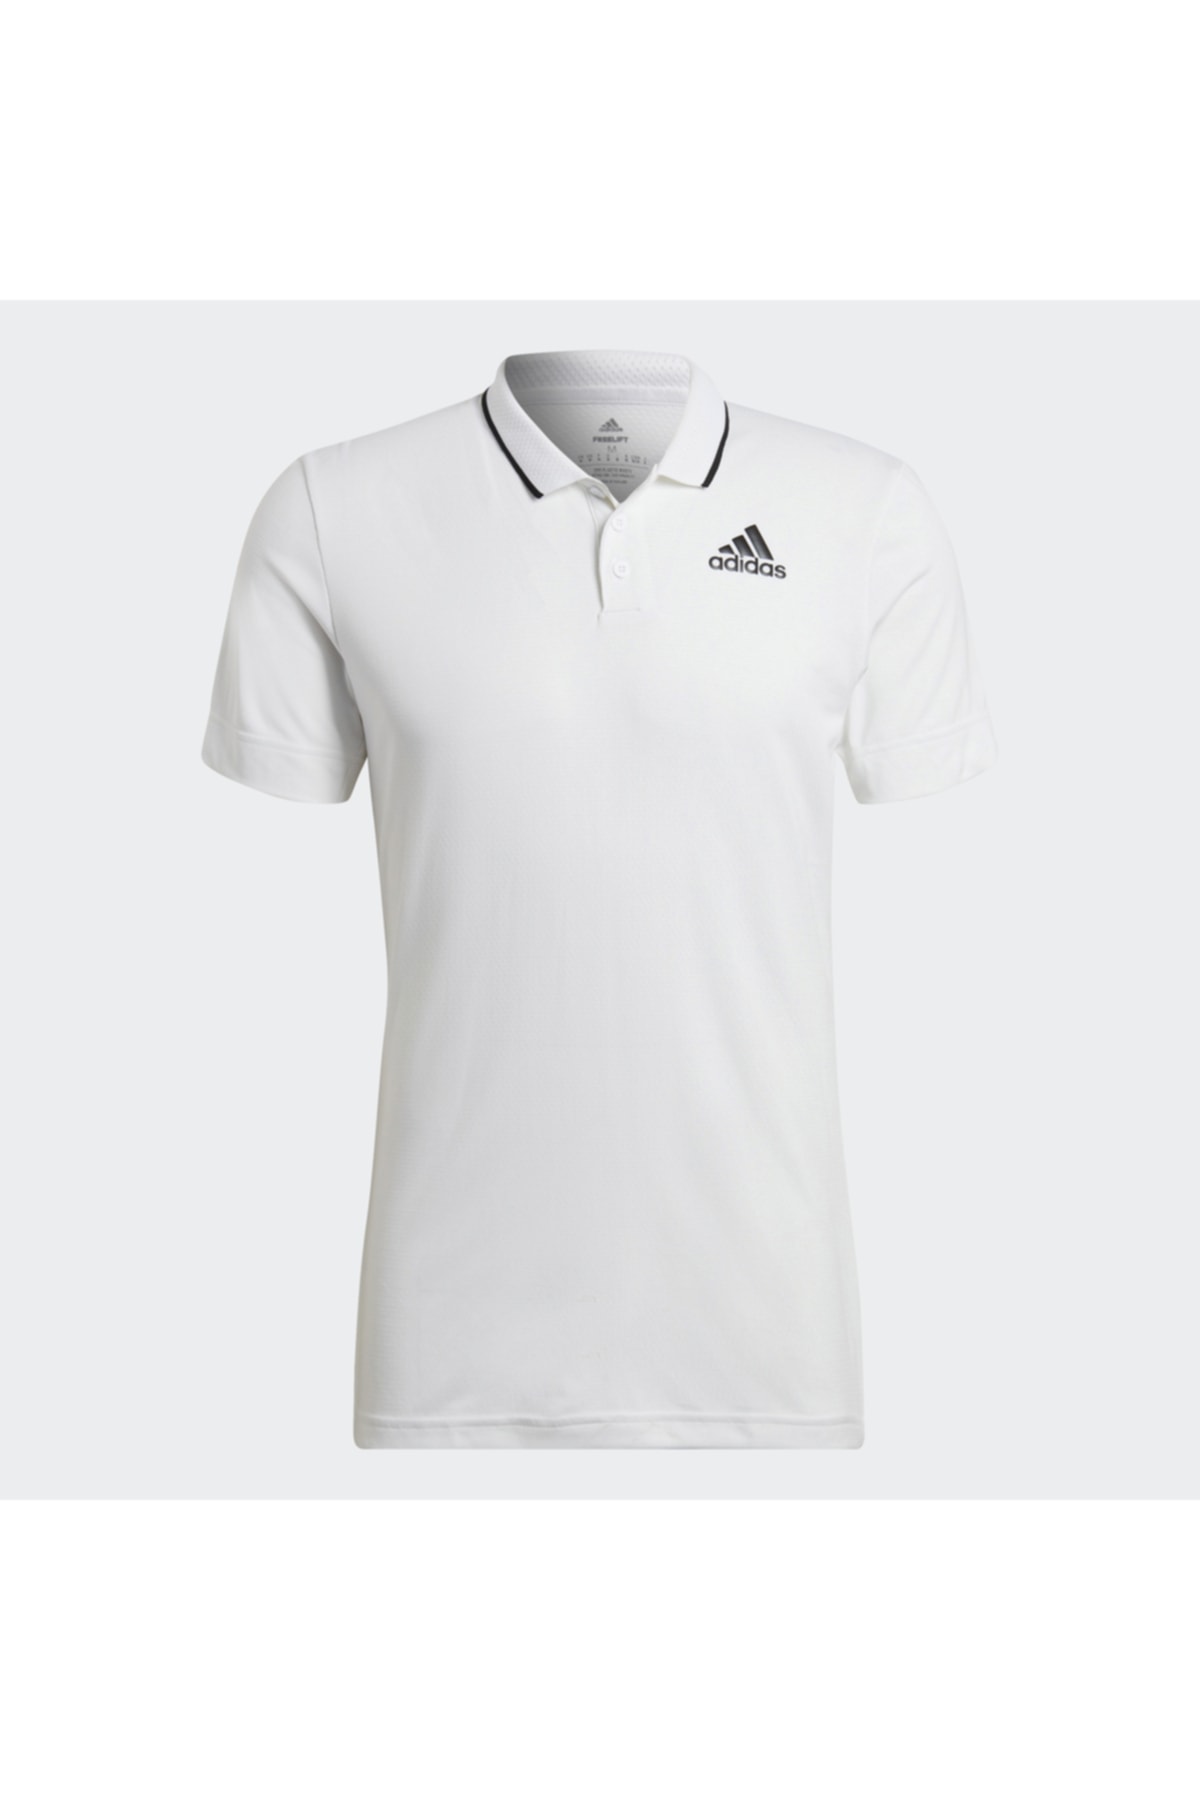 adidas Hb9135 Hb9135 T Freelıft Polo